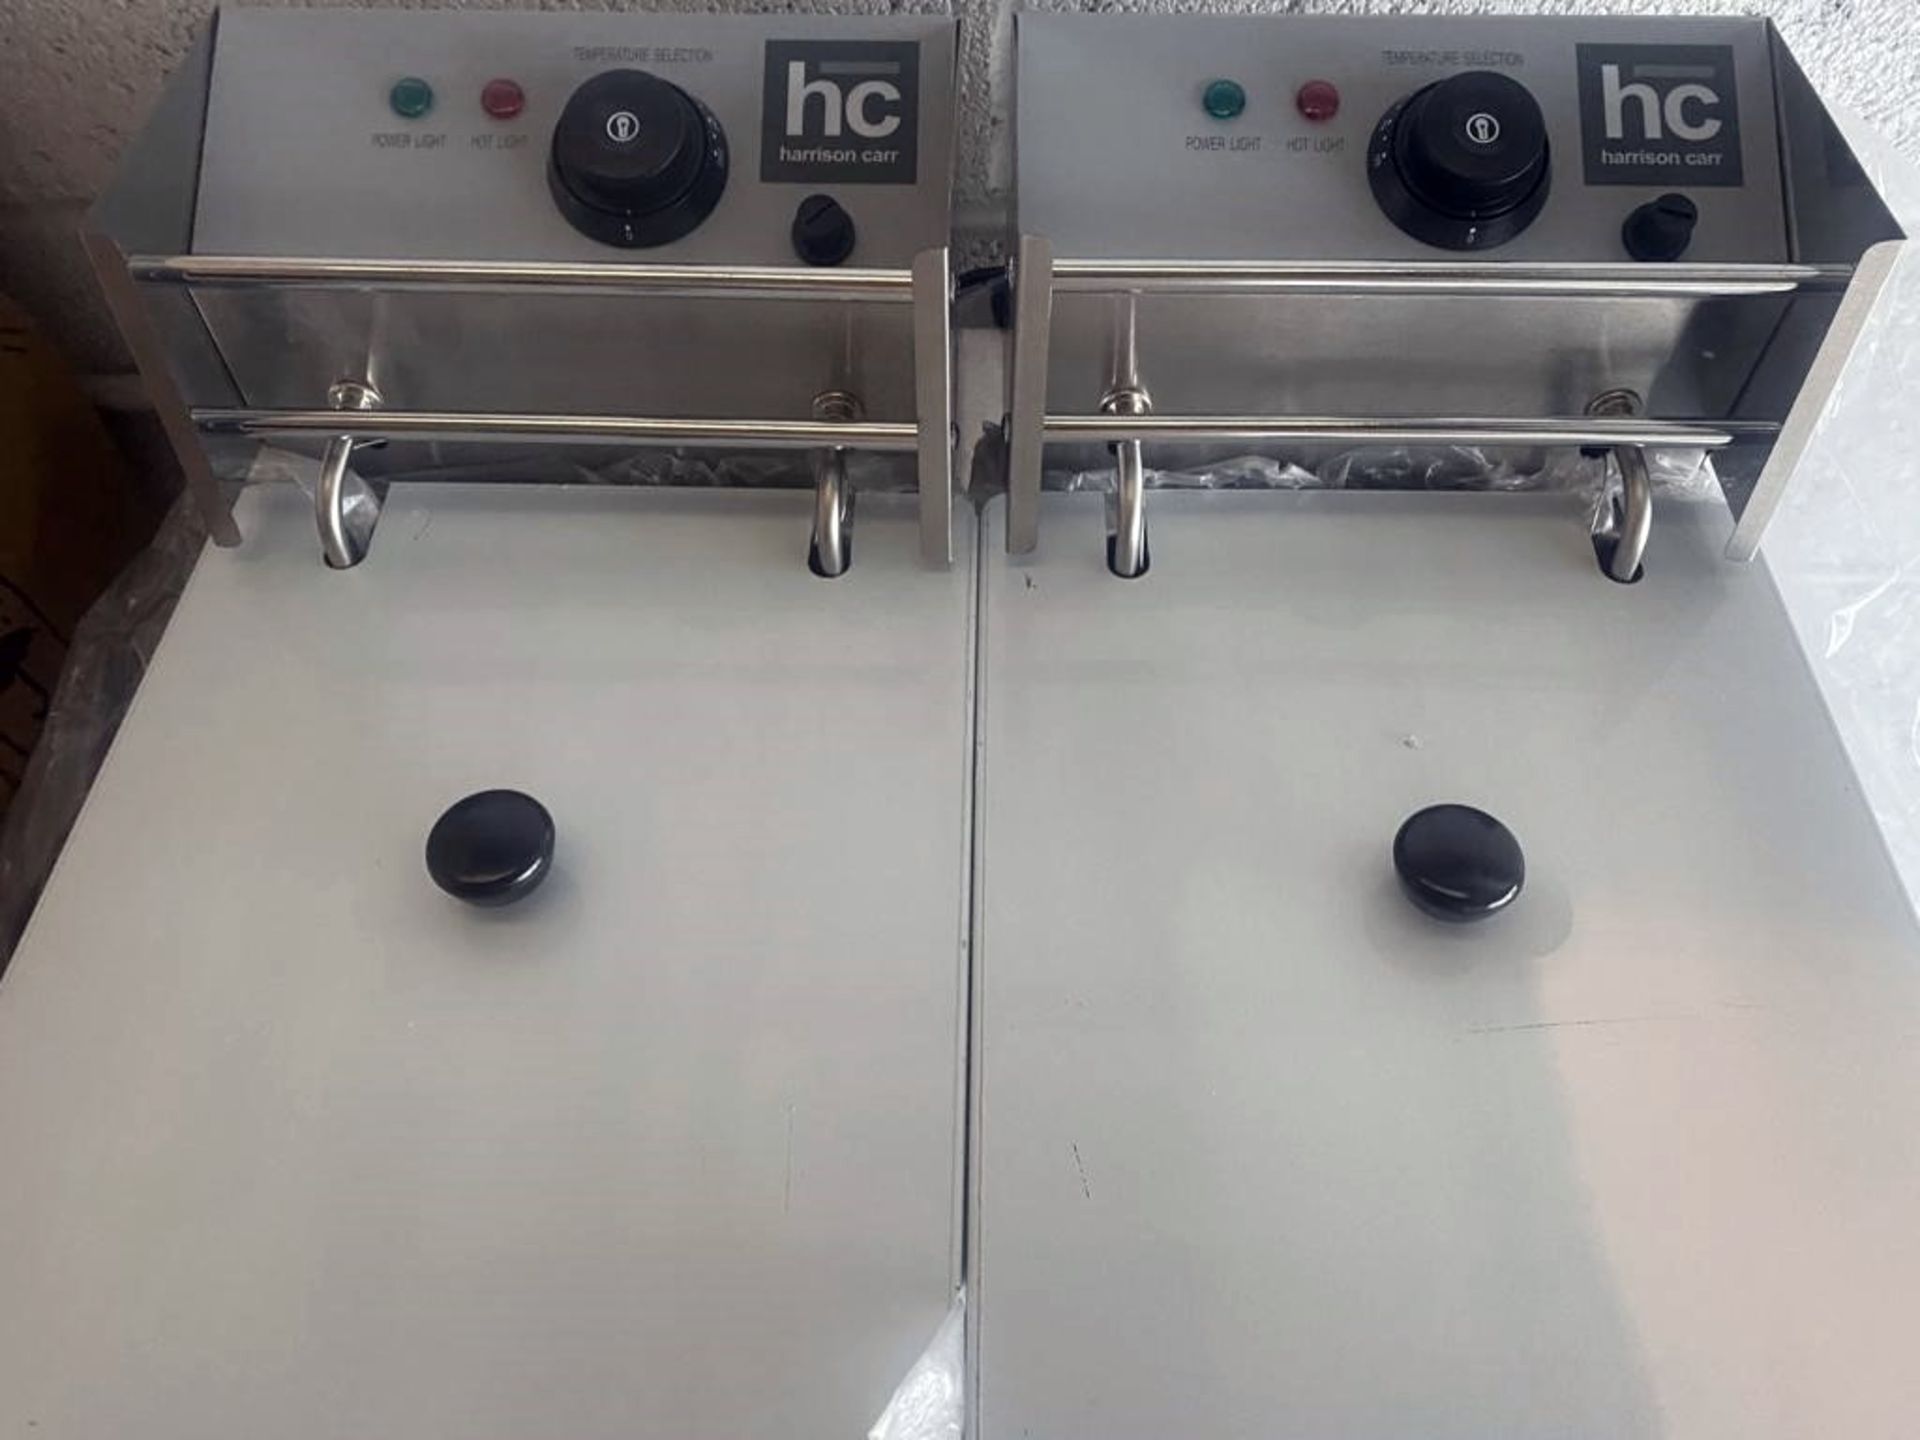 1 x HARRISON CARR Twin 2-Basket Countertop Electric Chips Fryer (HC-82) - 240v Single Phase - - Image 3 of 3